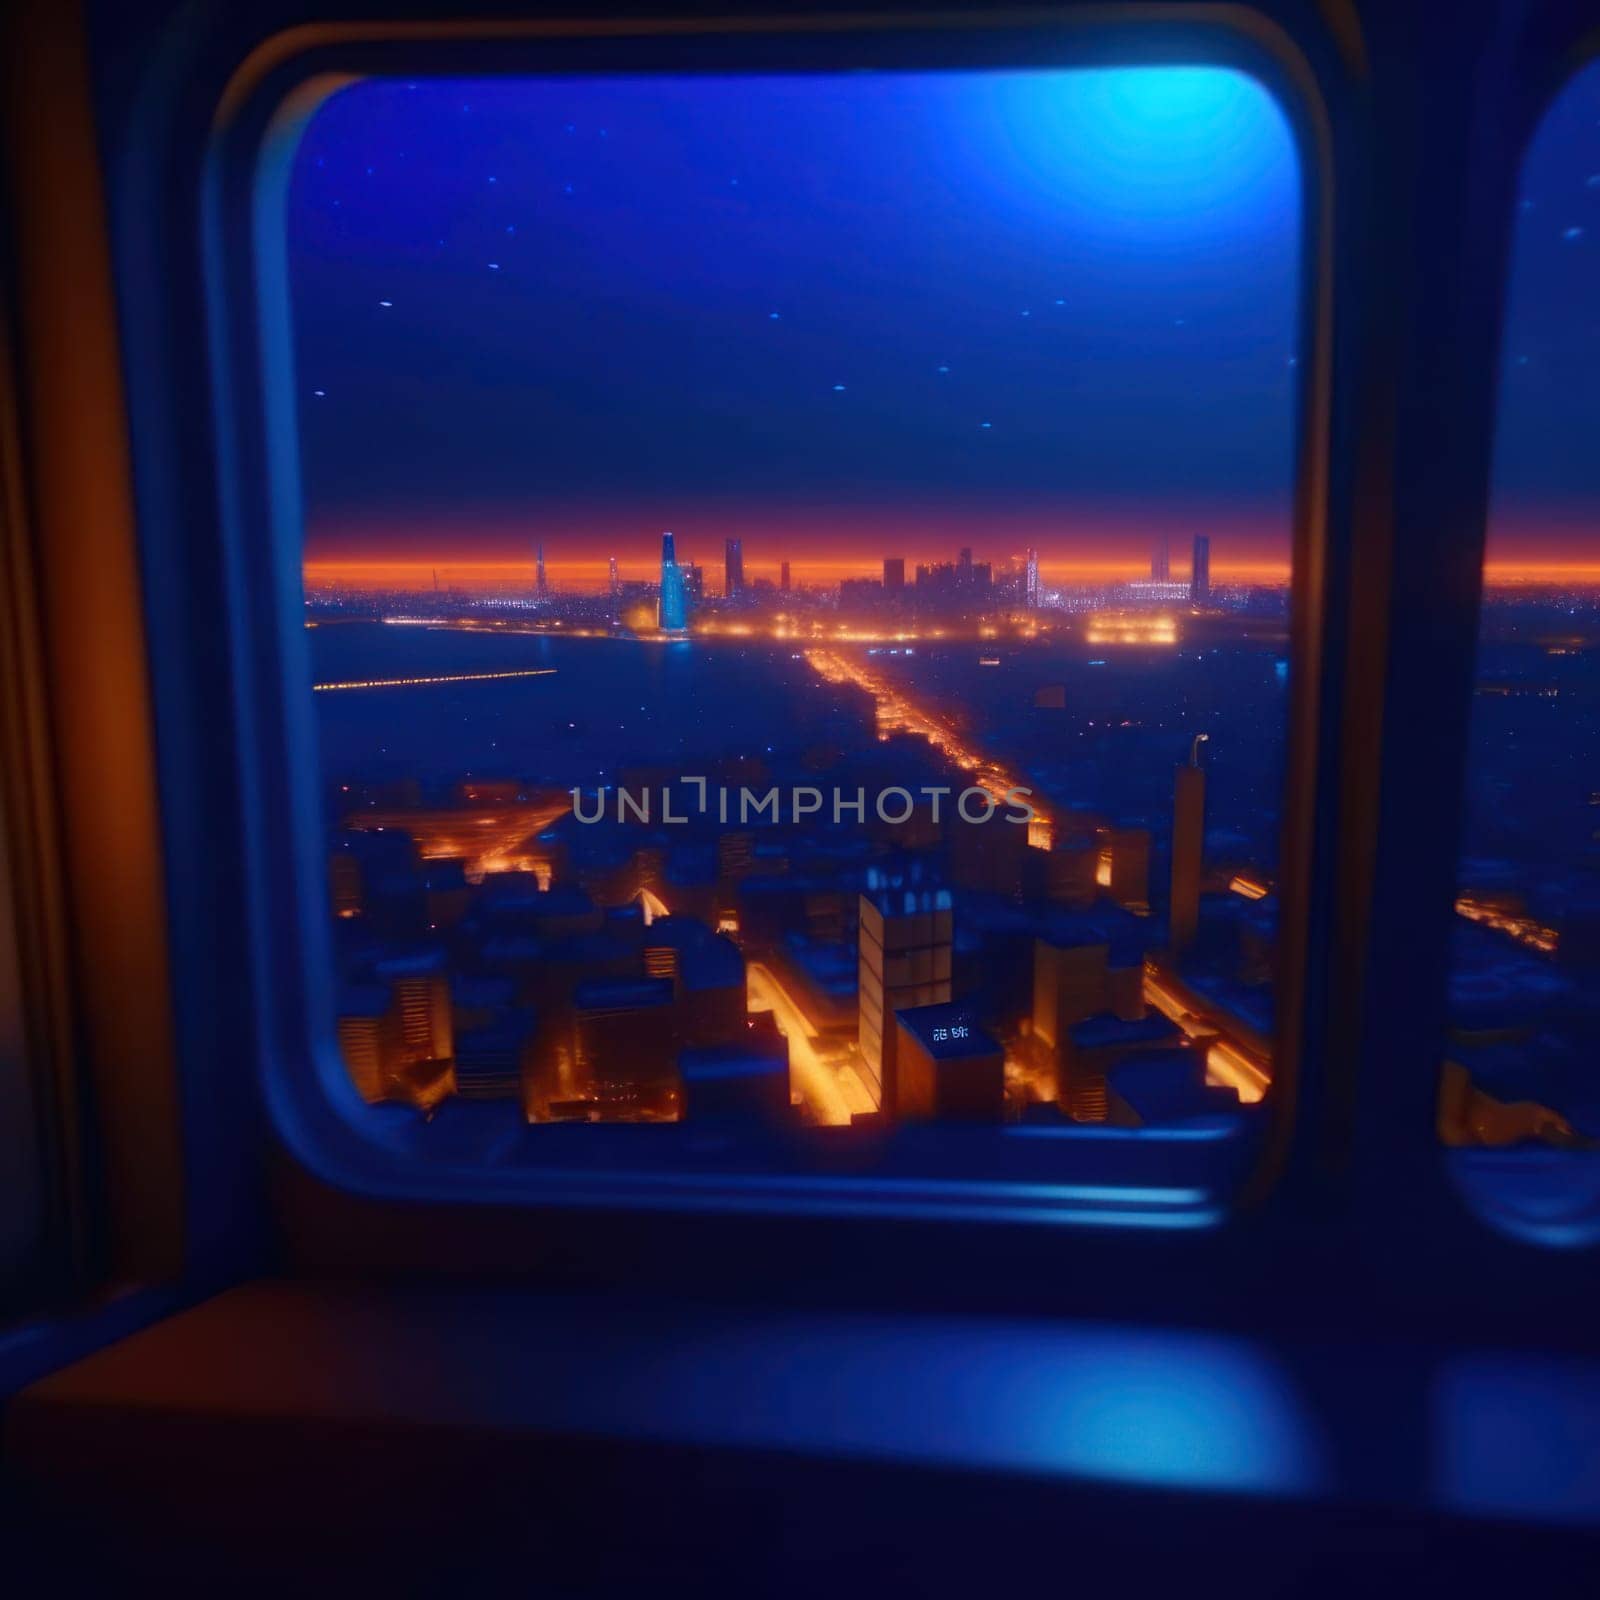 View from the airplane window. Image created by AI